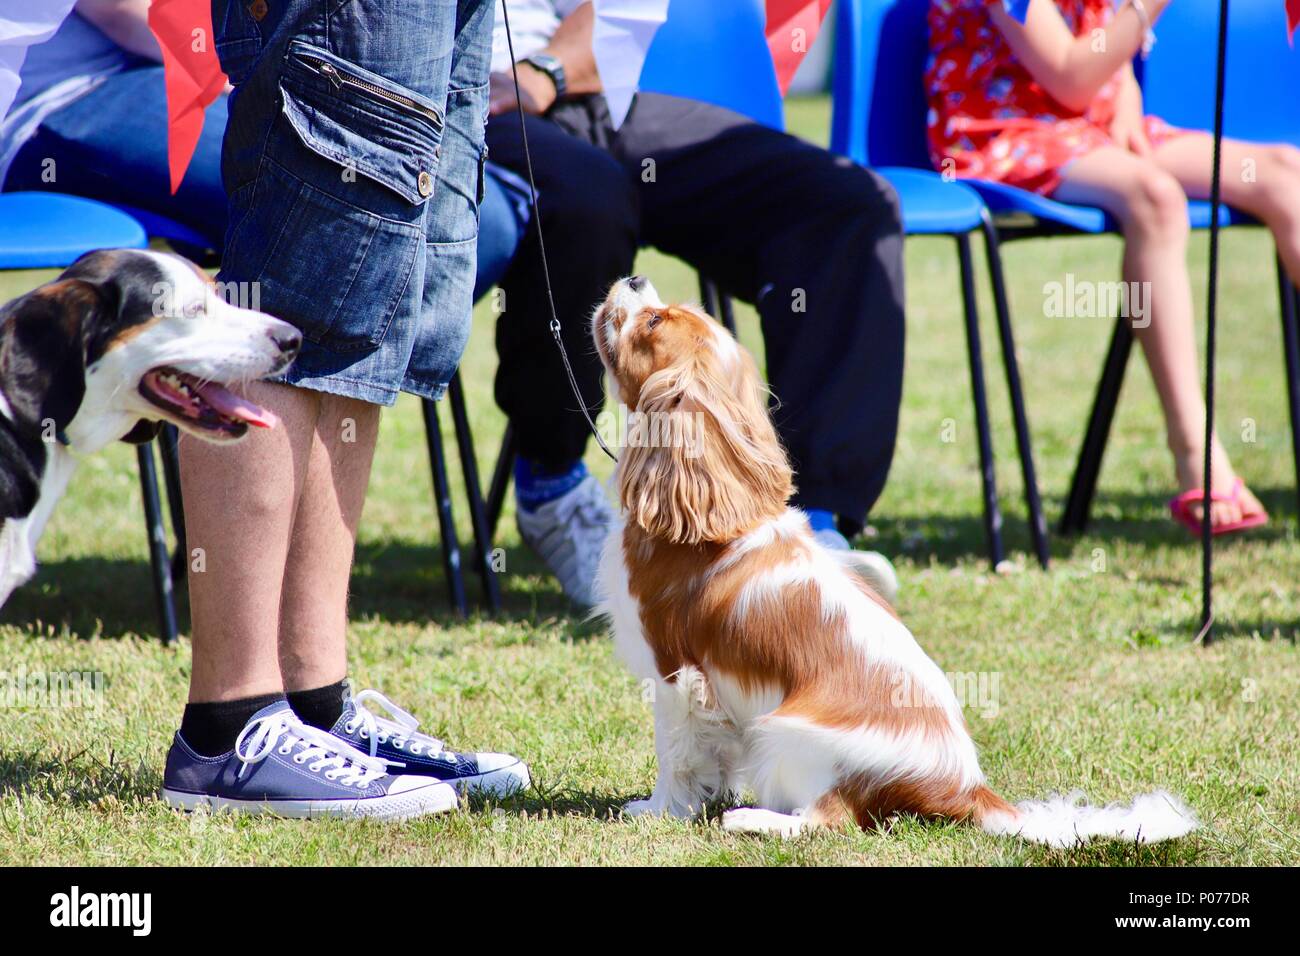 Ipswich, Suffolk, 9 June 2018. UK Weather: Hot bright and sunny for the Kesgrave Family Fun Day and Dog Show. Stock Photo